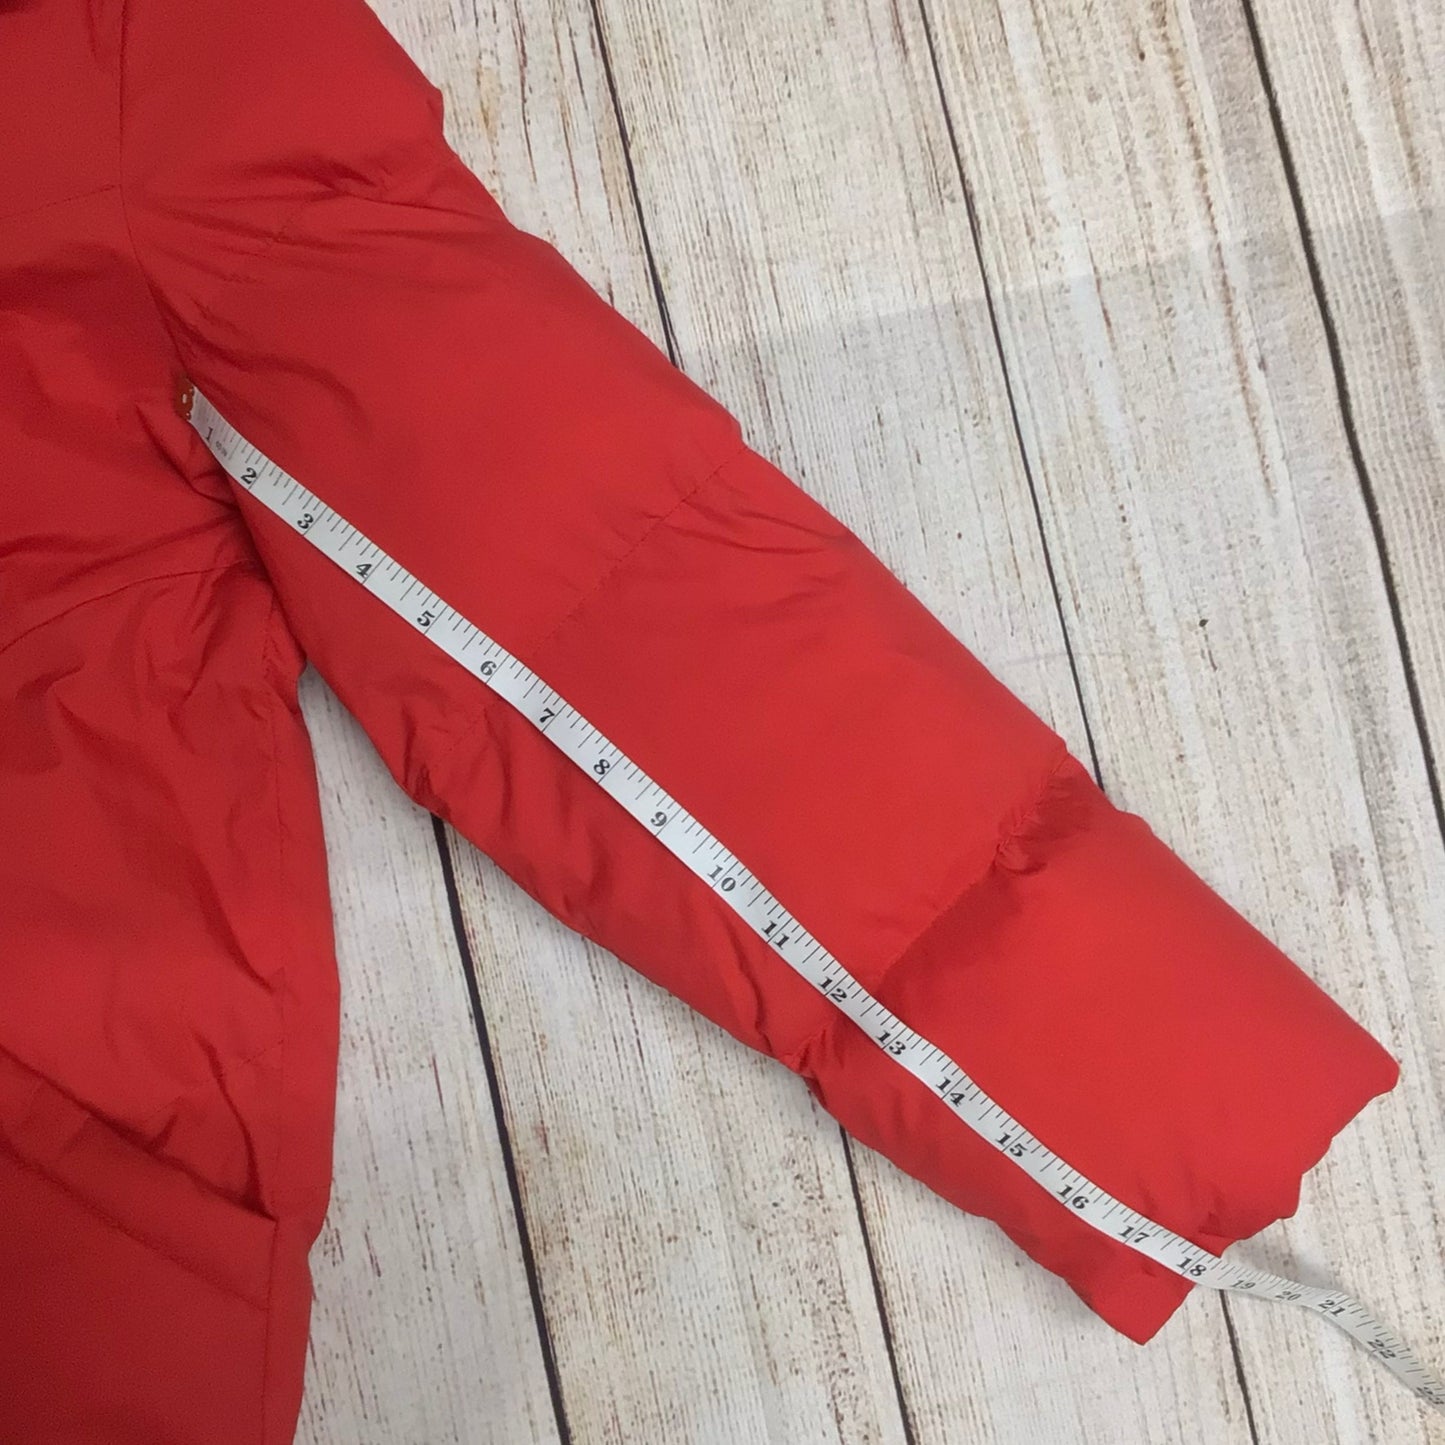 Madewell Primaloft Red Puffer Jacket Size S